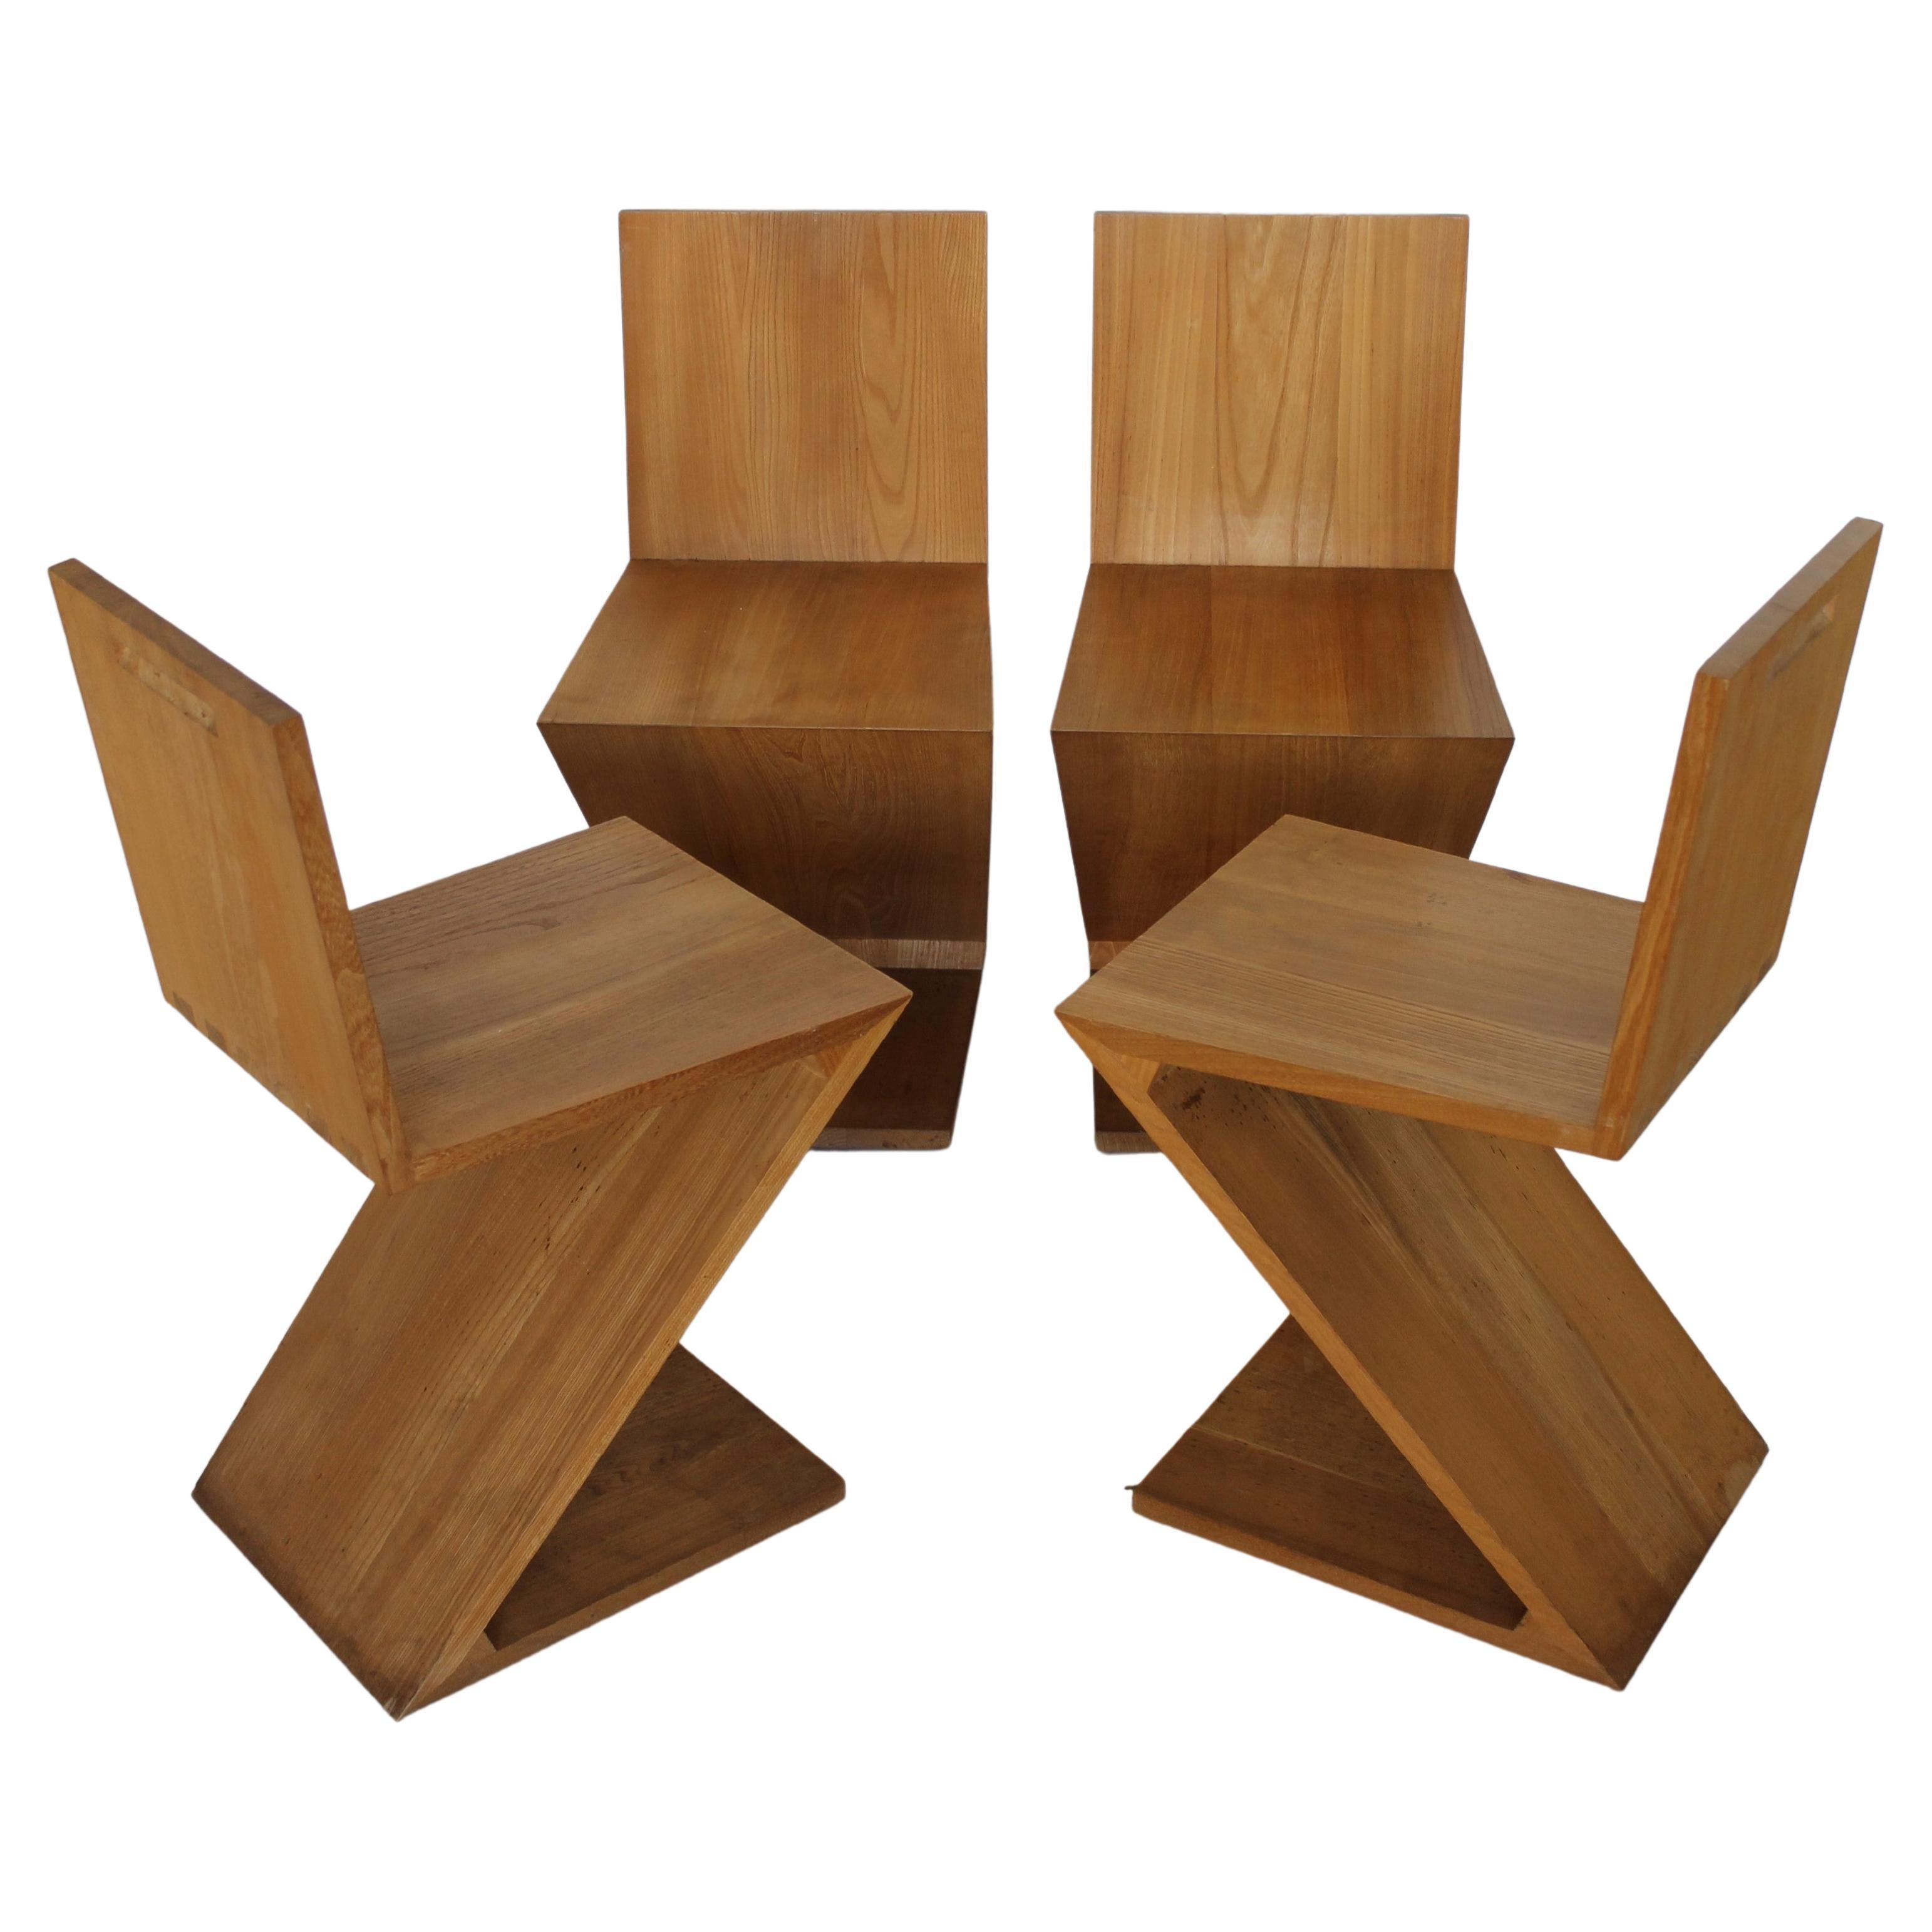  Gerrit Rietveld "Zig-Zag" Chairs by Cassina, Italy 1973 'Four Available'